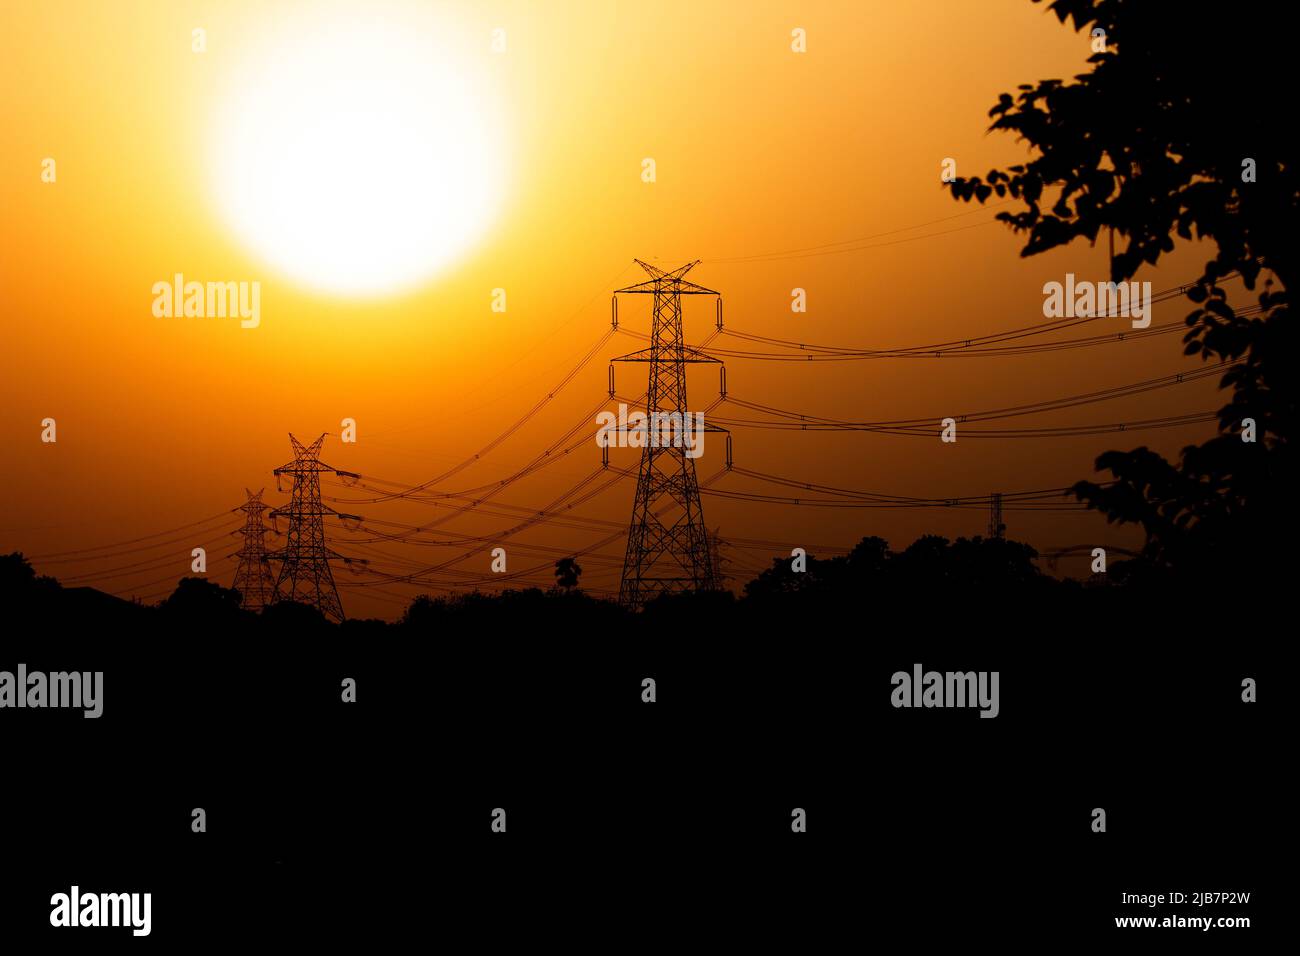 An electricity transmission pylon silhouetted Stock Photo